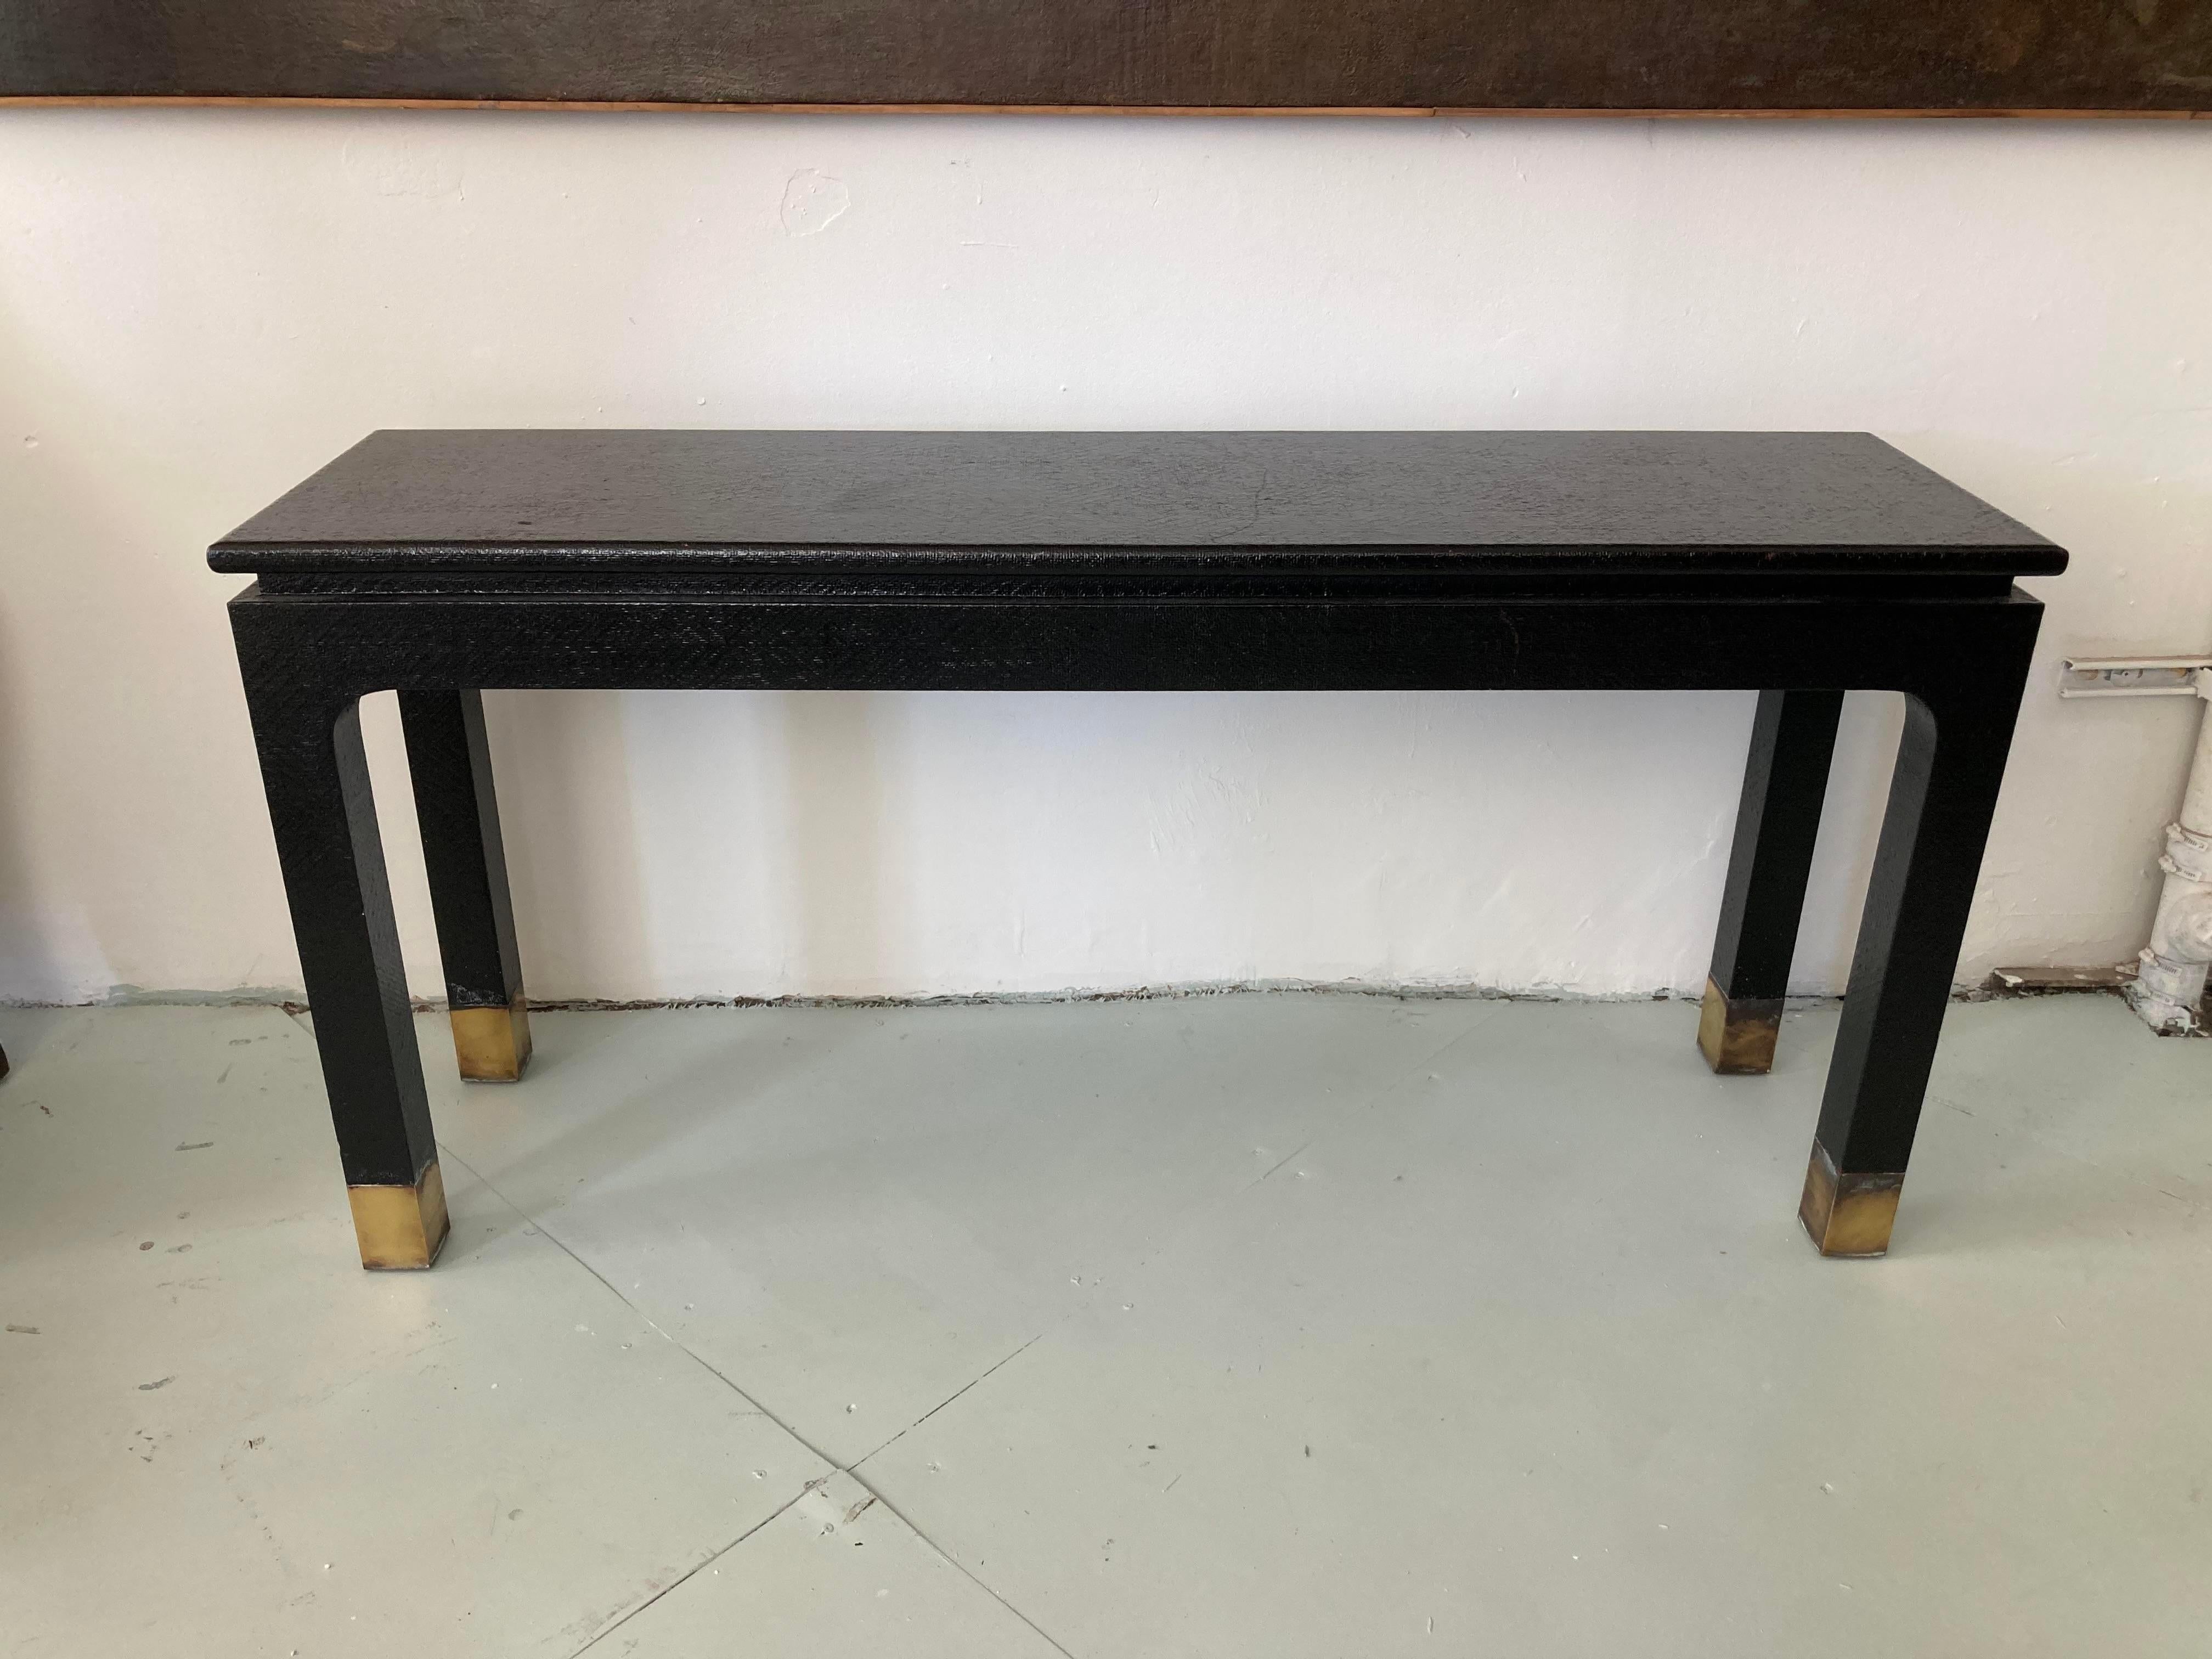 Fantastic original Van Horn console table with Asian details. Black Lacquered Raffia with settle Asian Red undertones similar to an Asian Black Lacquered box. Fabulous Brass leg caps set off the design. 